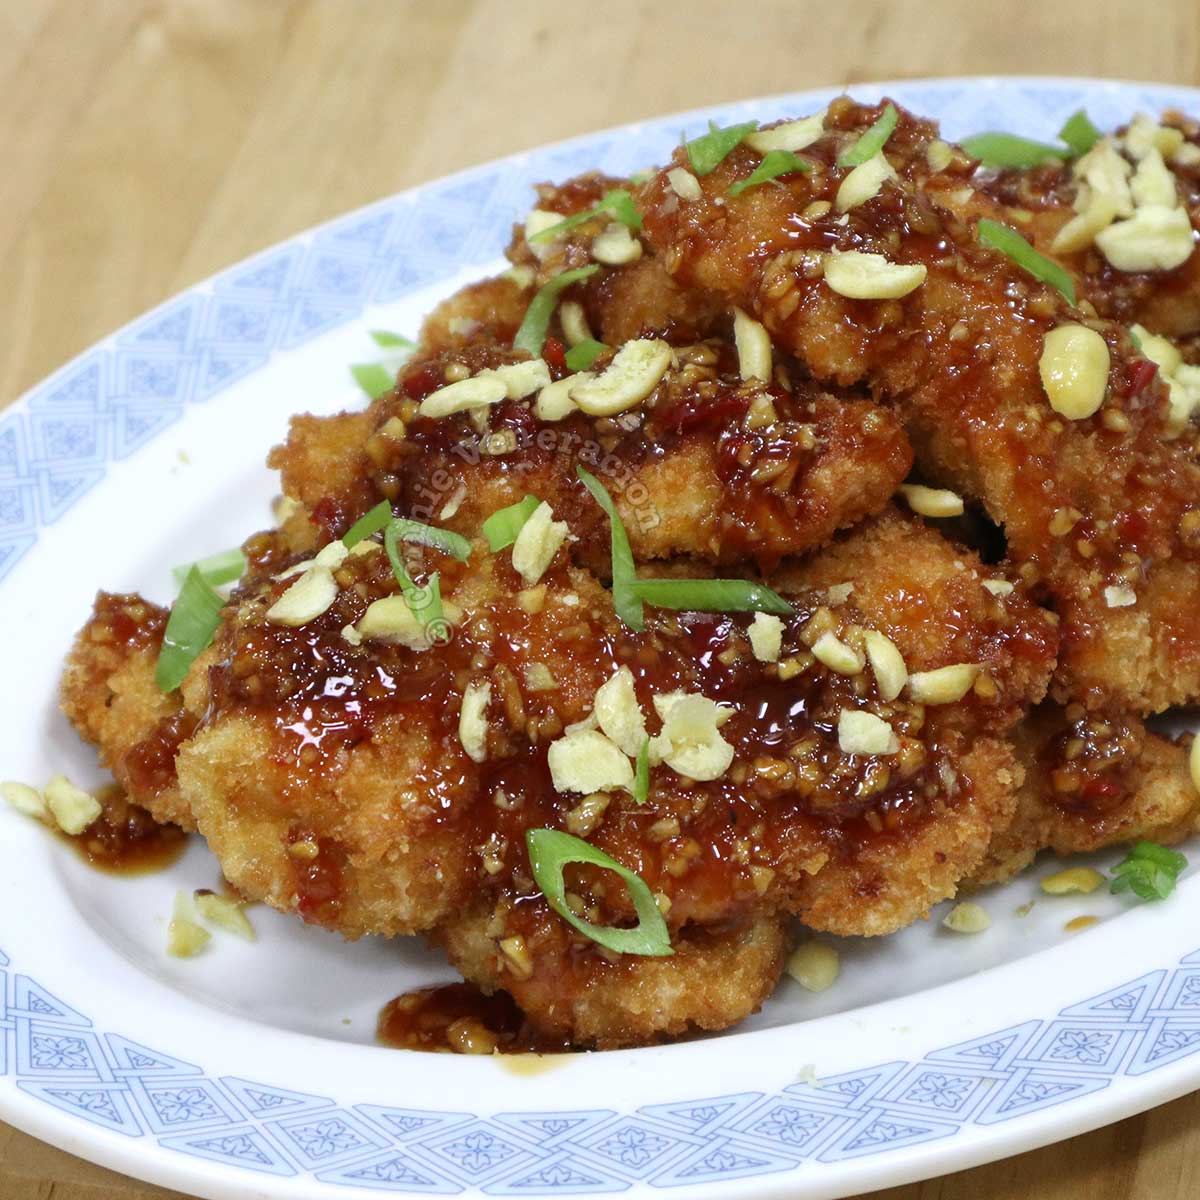 Thai-inspired sweet spicy fried chicken fillets